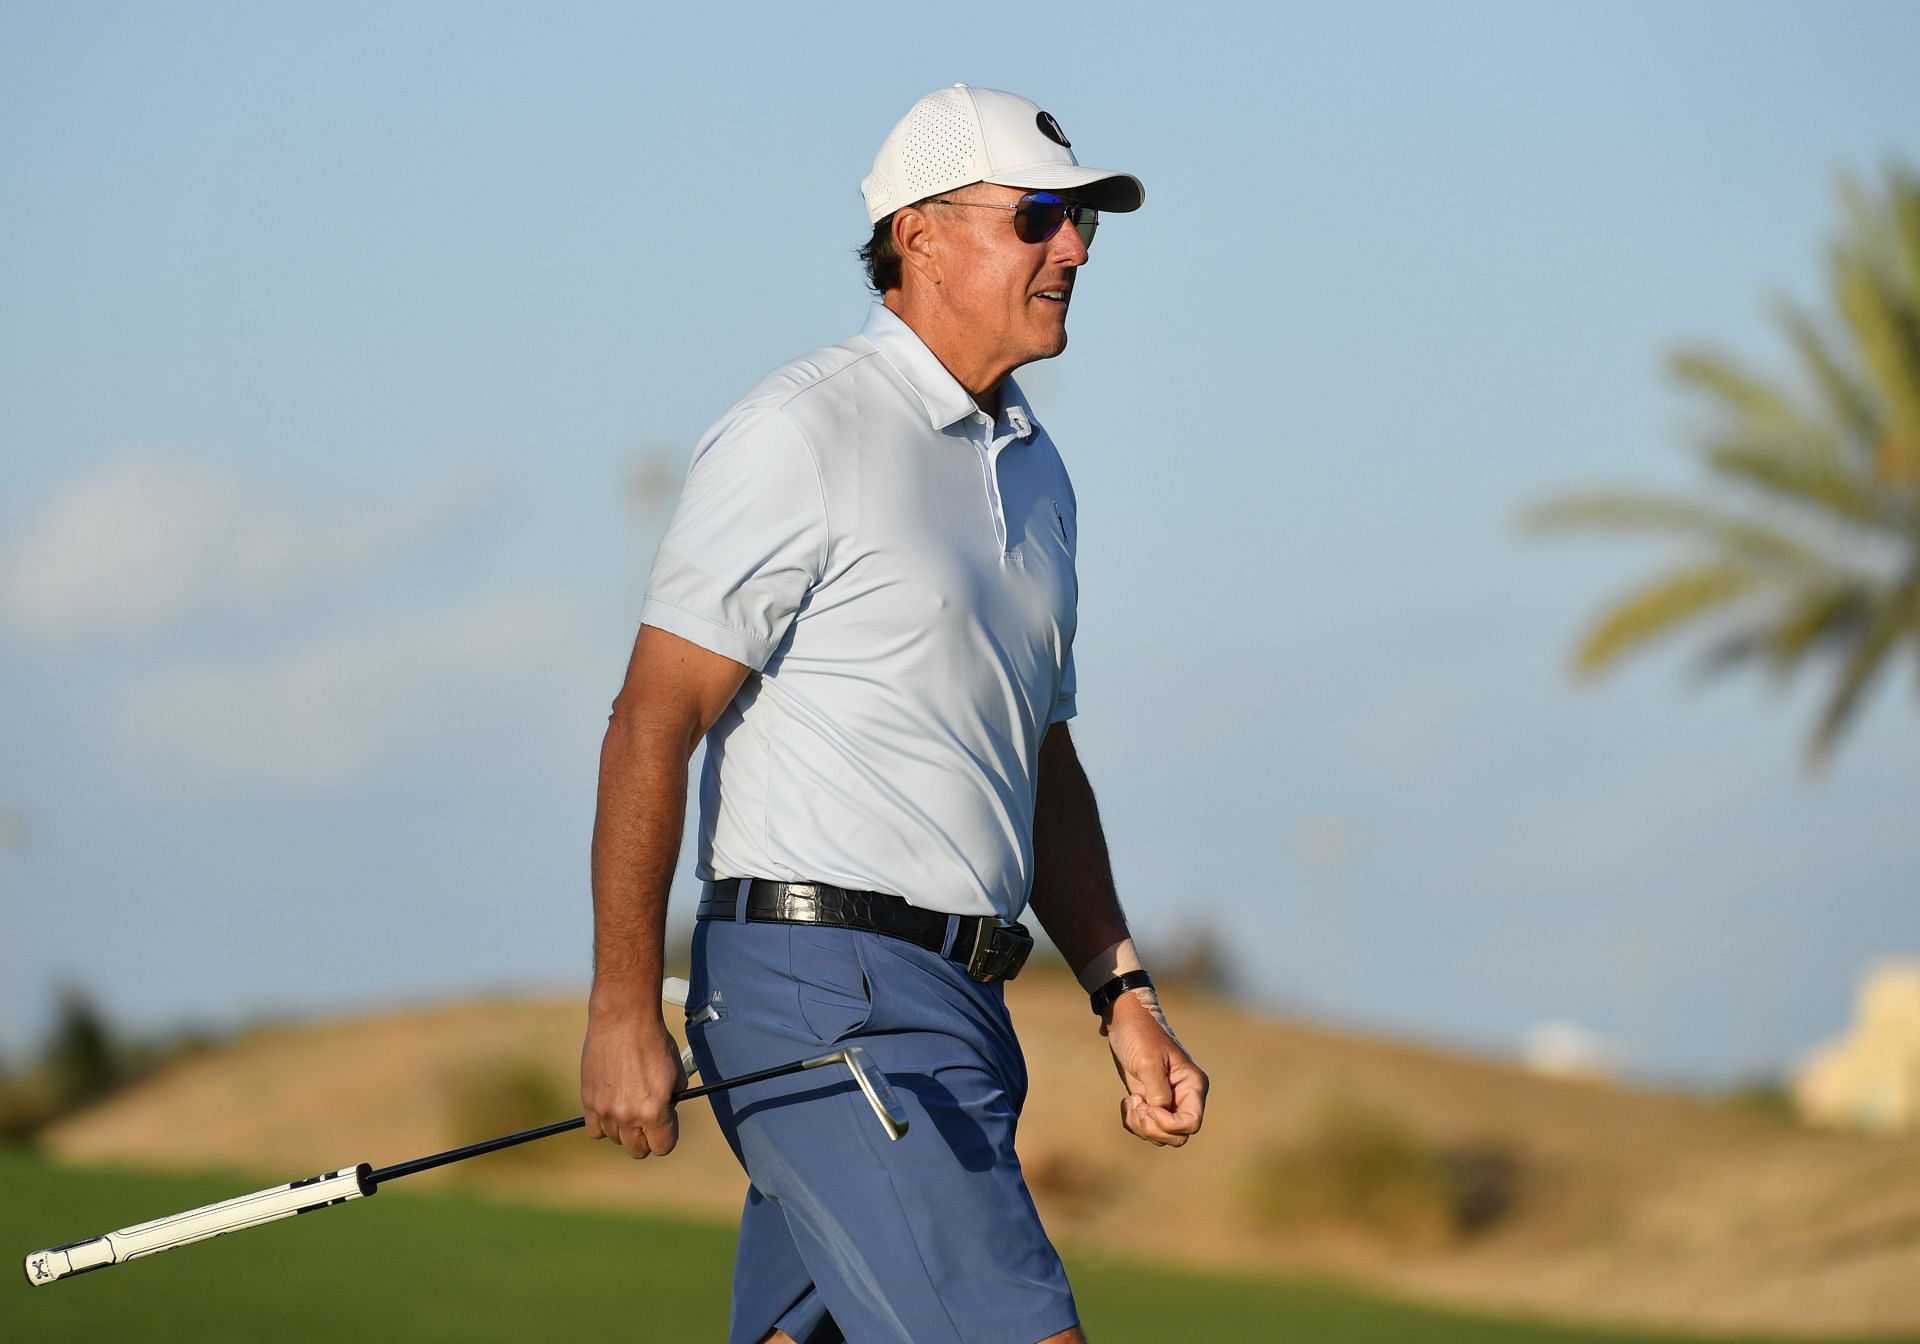 Phil Mickelson at the PIF Saudi International - Day One (Image via Tom Dulat/Getty Images)